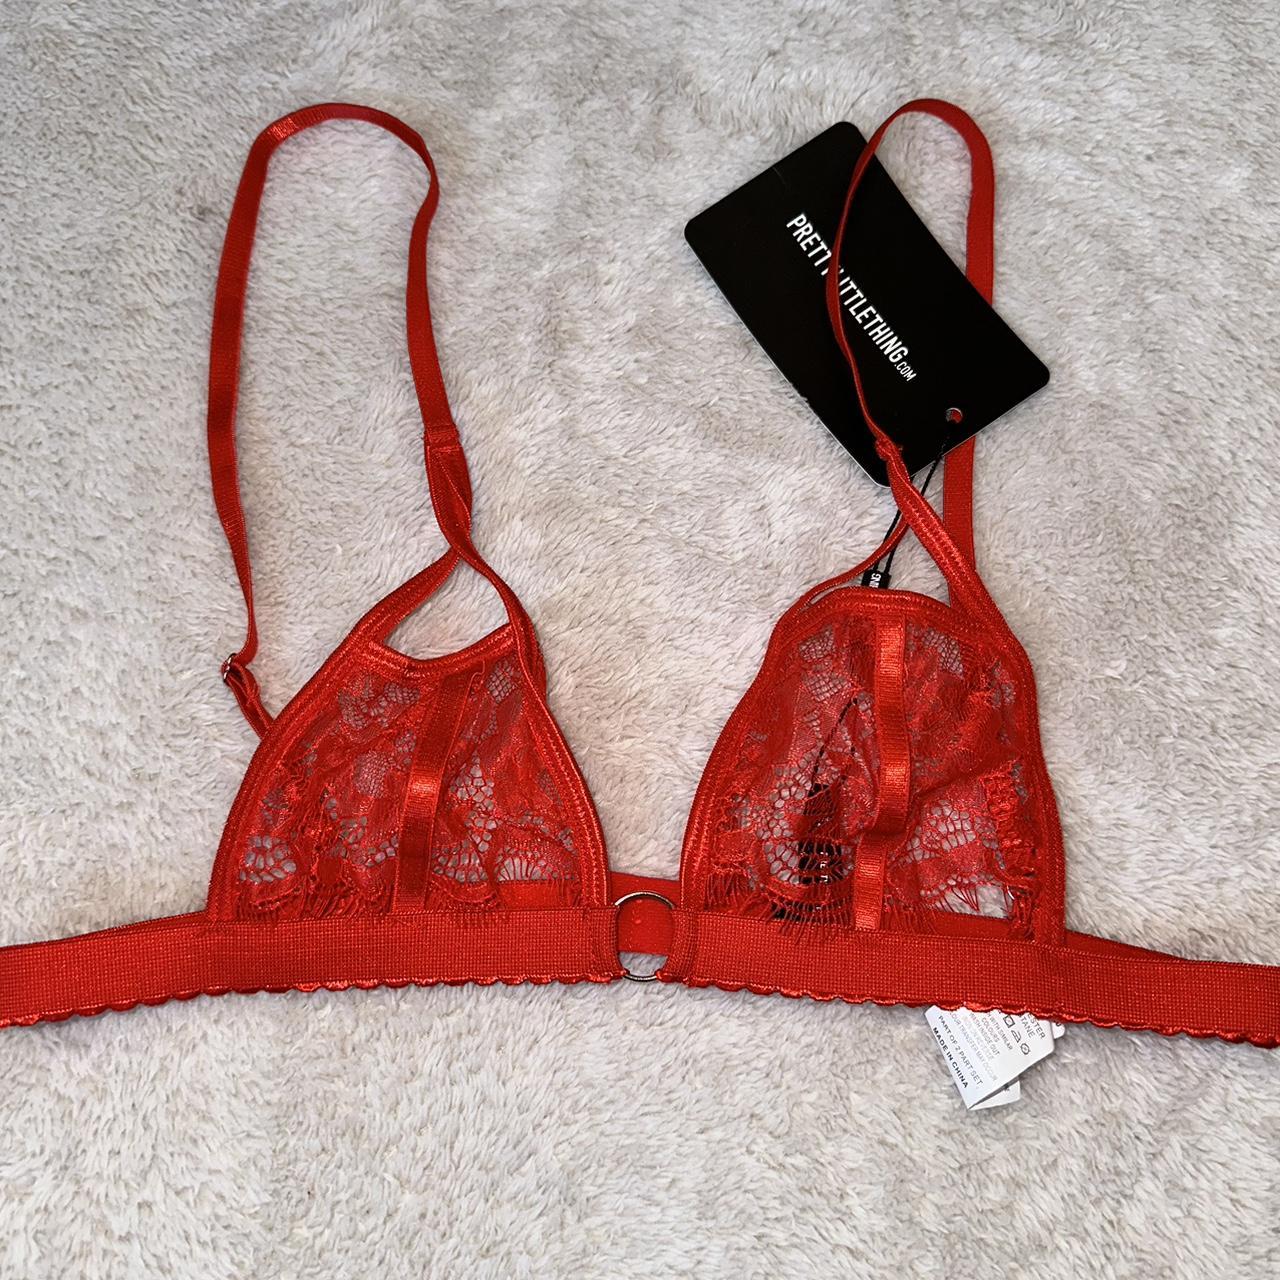 See through red bralette. Clasps in back with... - Depop